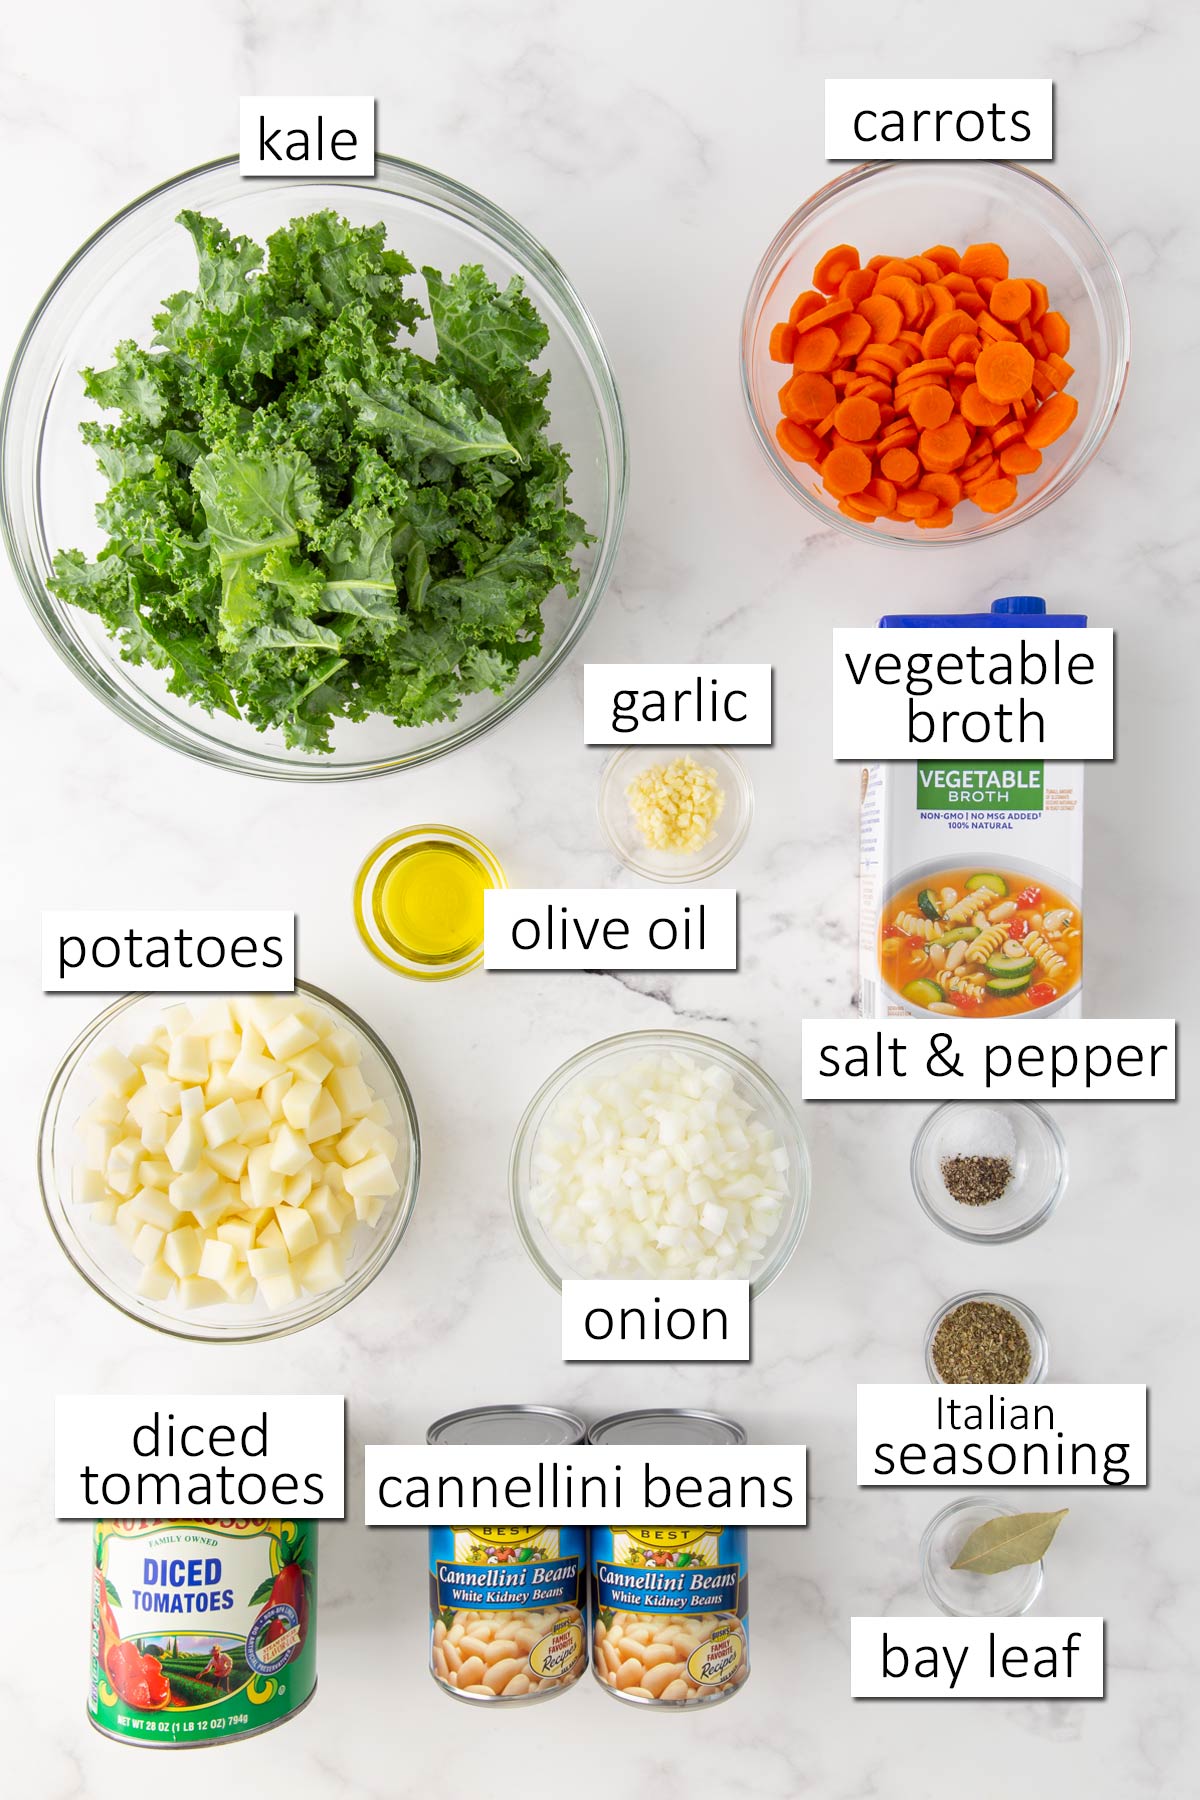 Overhead view of ingredients for kale soup on a white marble surface.